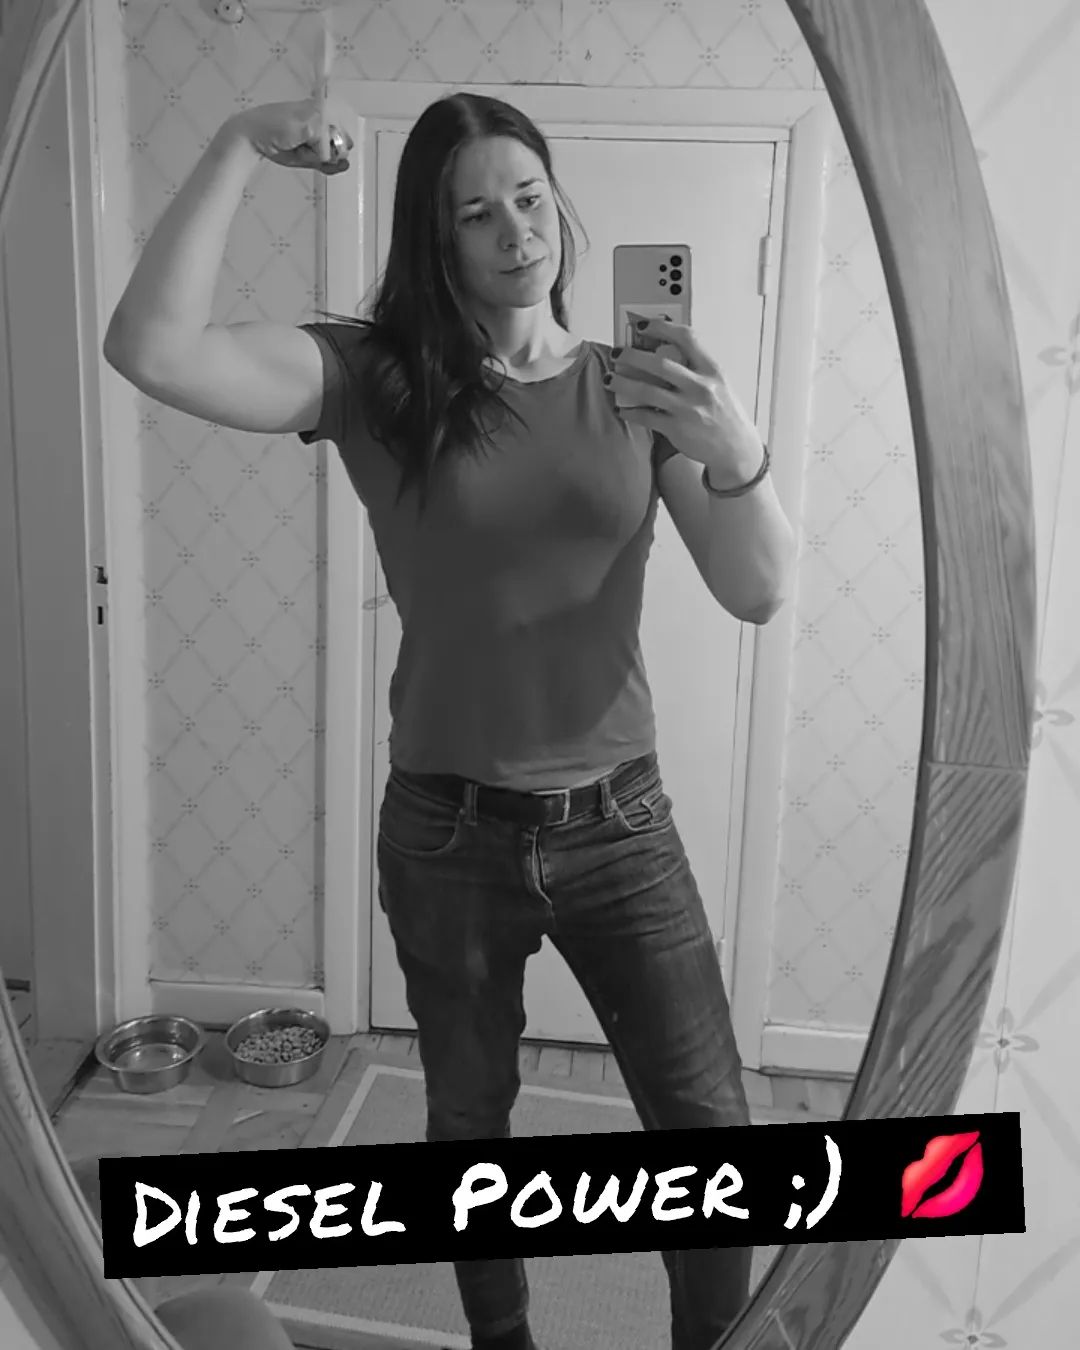 I can lift you ;) 😘😘
.
.
.
.
.
#girl #brunette #hot #gorgeous #bodybuilder #bodybuilding #muscles #fit #fitness #crossfit #training #workout #model #fashion #strong #single #singlegirl #finnishgirl #swedishgirl #bisexual #queer #finnish #swedish #power